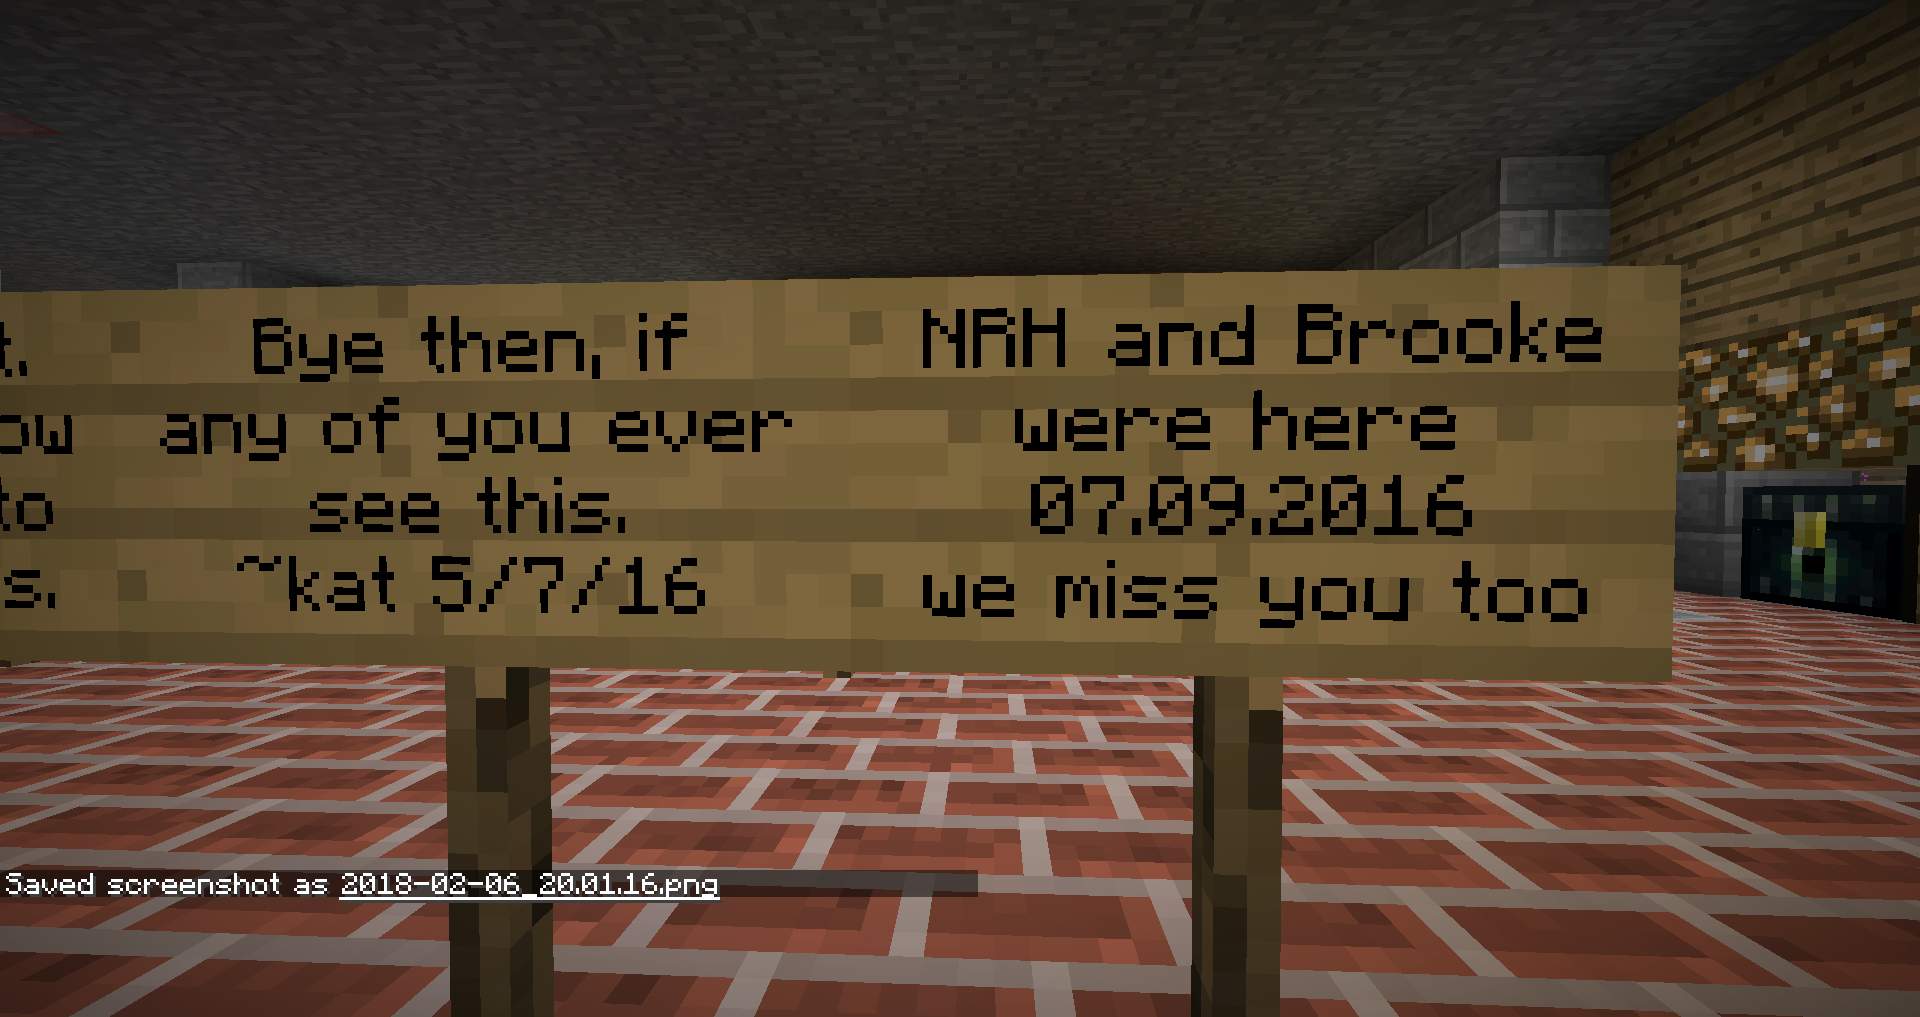 The recipients of the signpost message log into the Minecraft server less than two months later, expressing their own desire to reconnect with their gaming comrades.